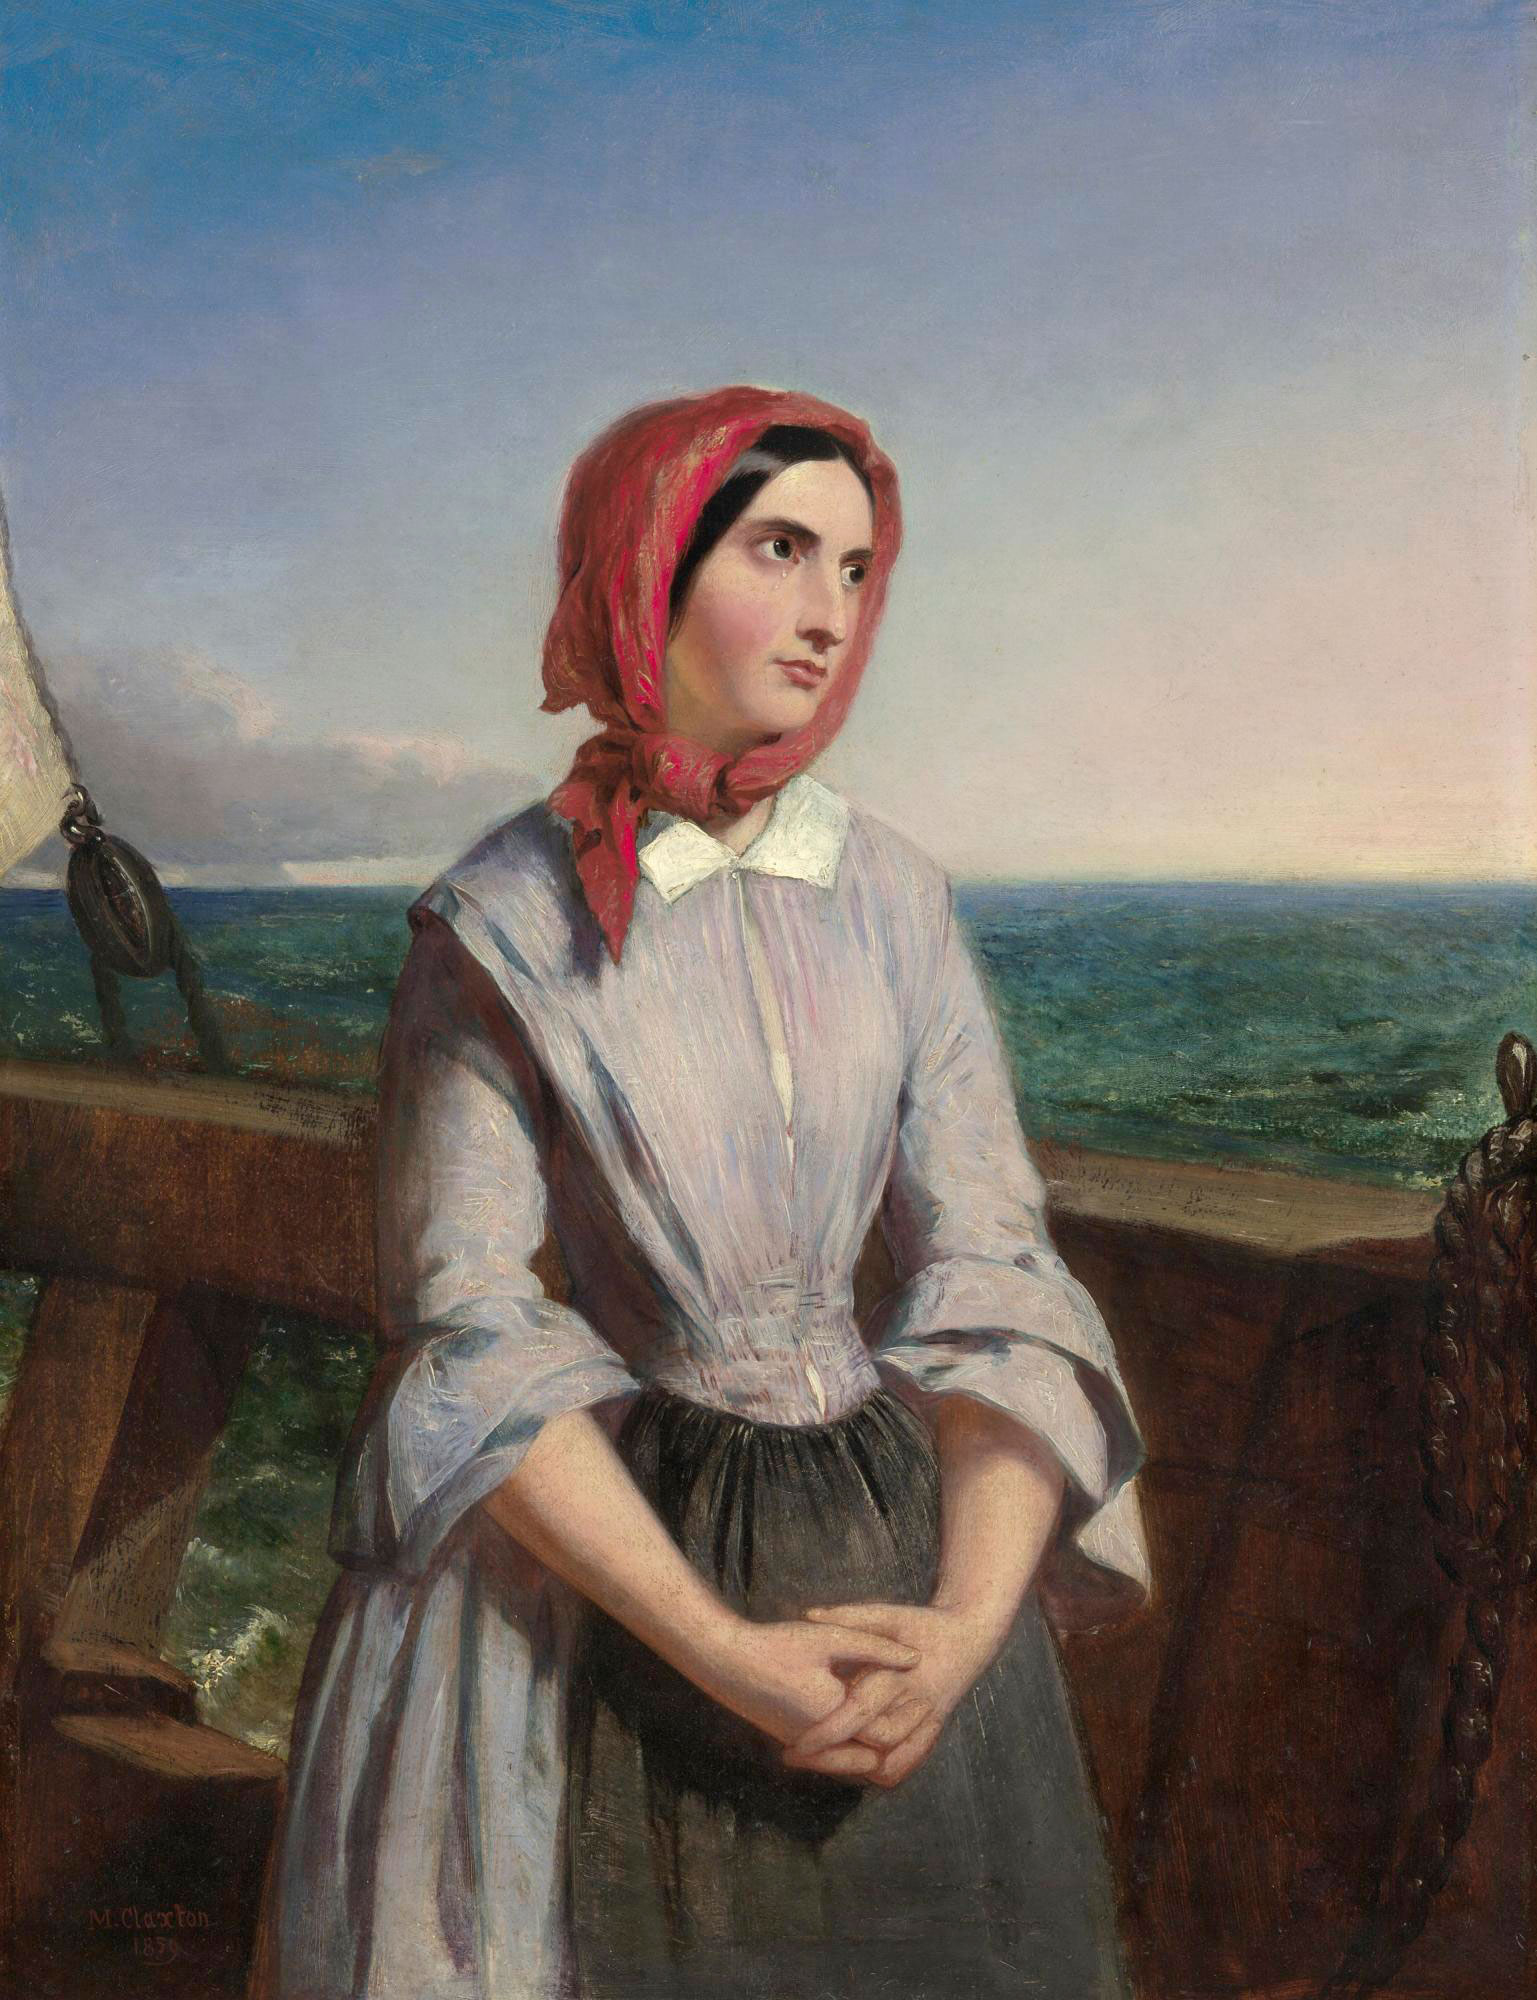 <p><em>An emigrant’s thoughts of home</em> by Marshall Claxton,1859</p>
